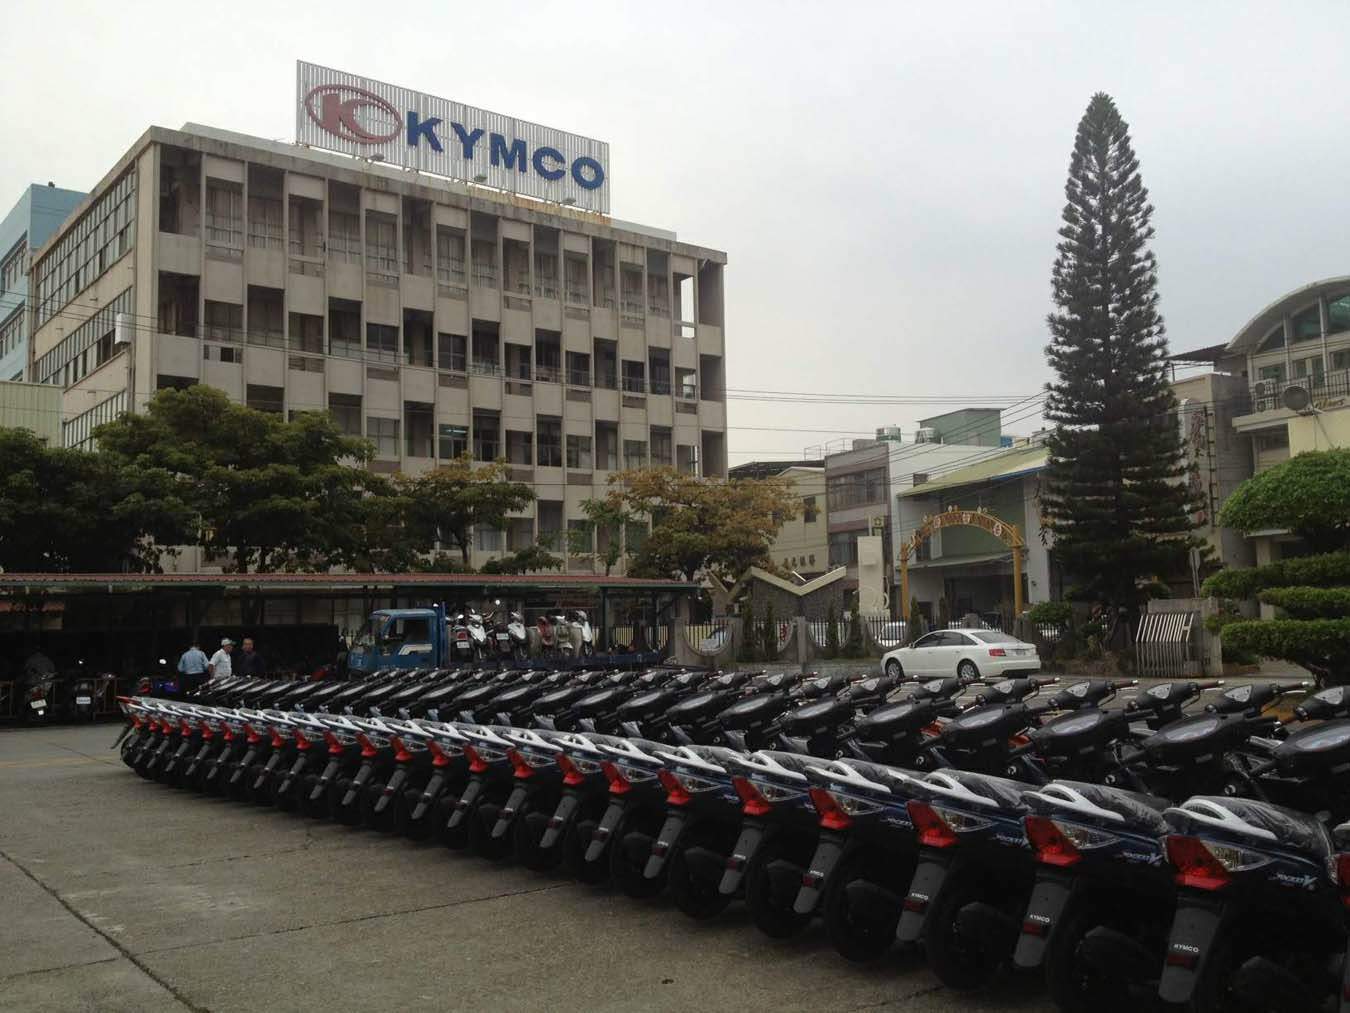 Kymco Motorcycle Specifications